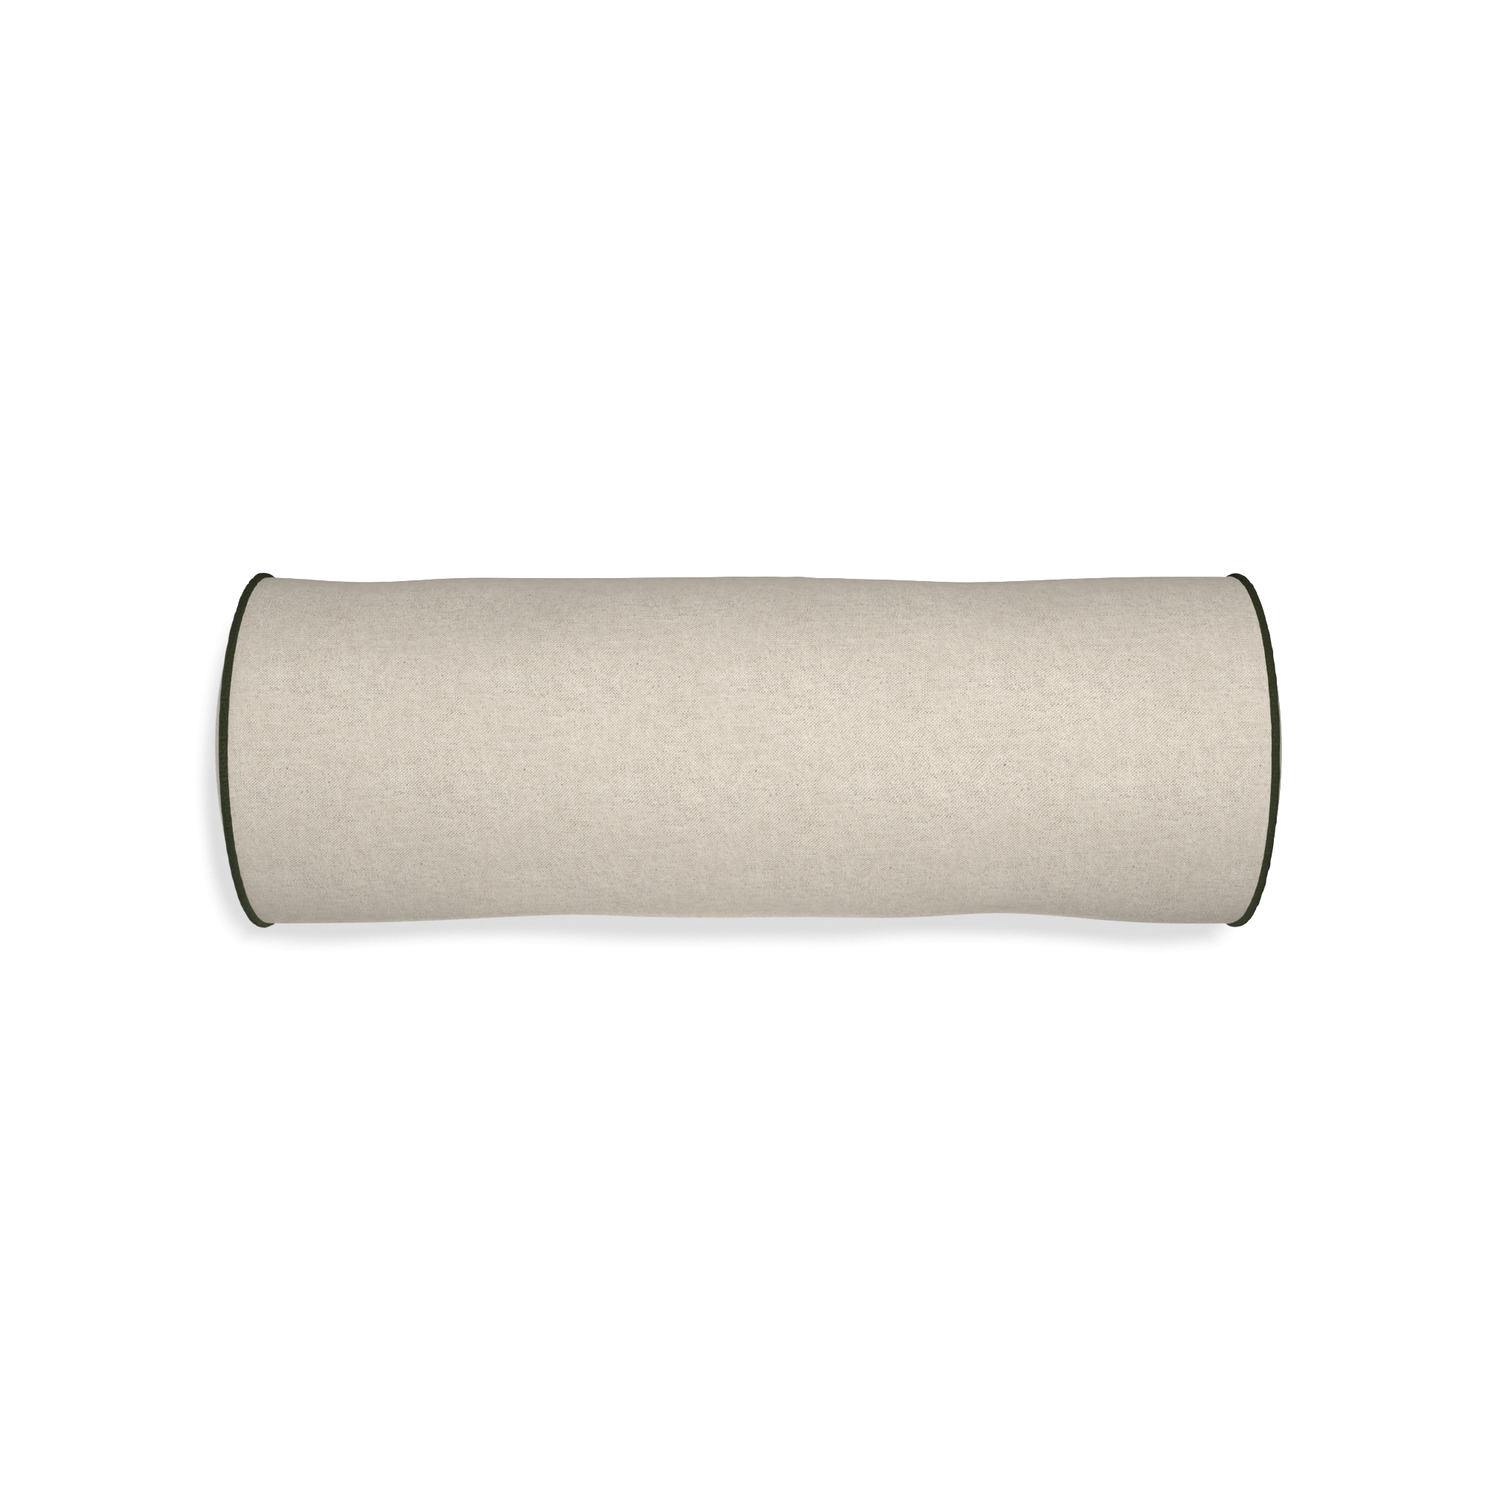 Bolster oat custom light brownpillow with f piping on white background